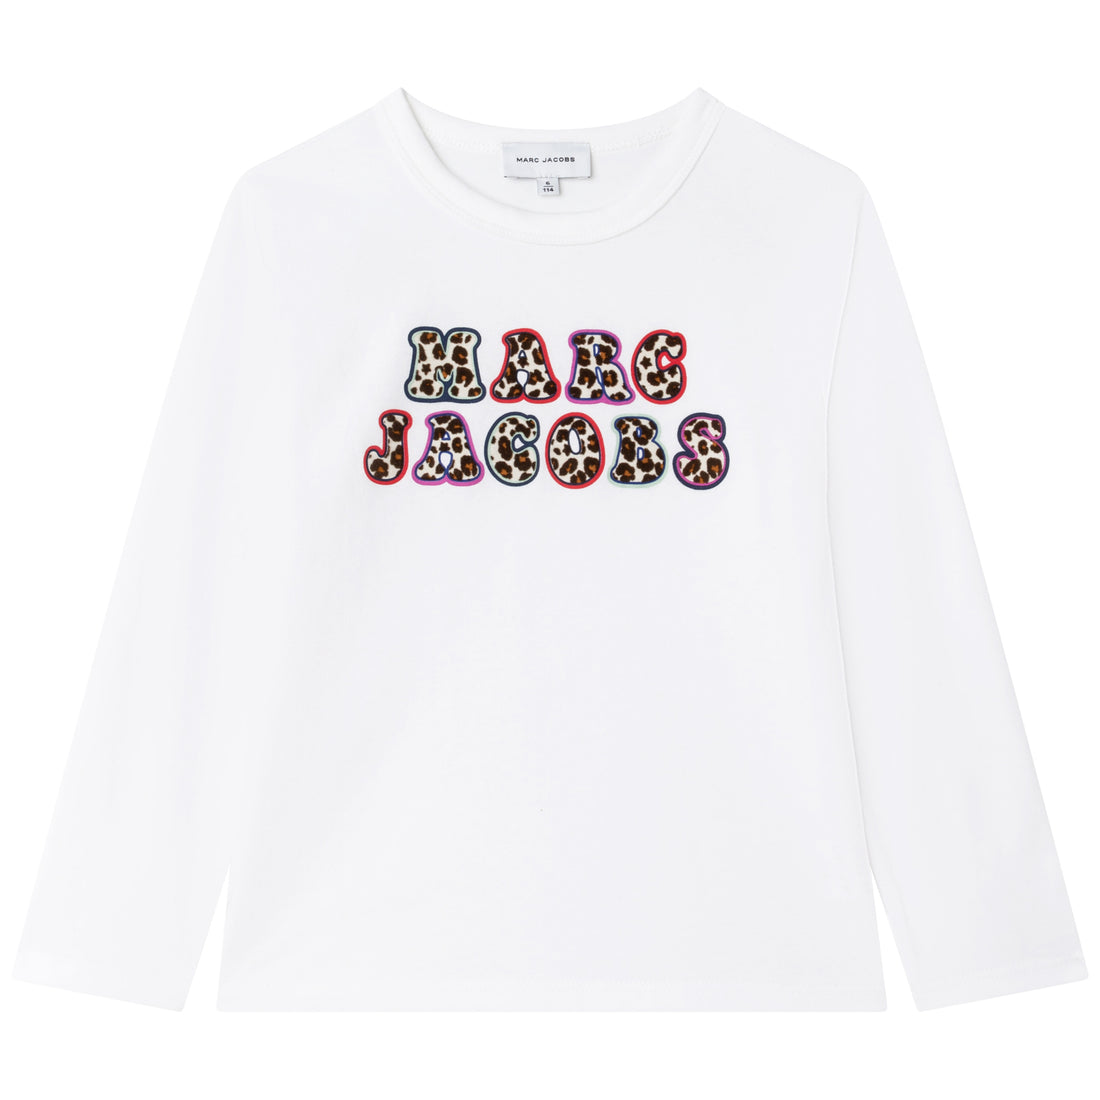 The Marc Jacobs Long Sleeve T-Shirt Style: W15618